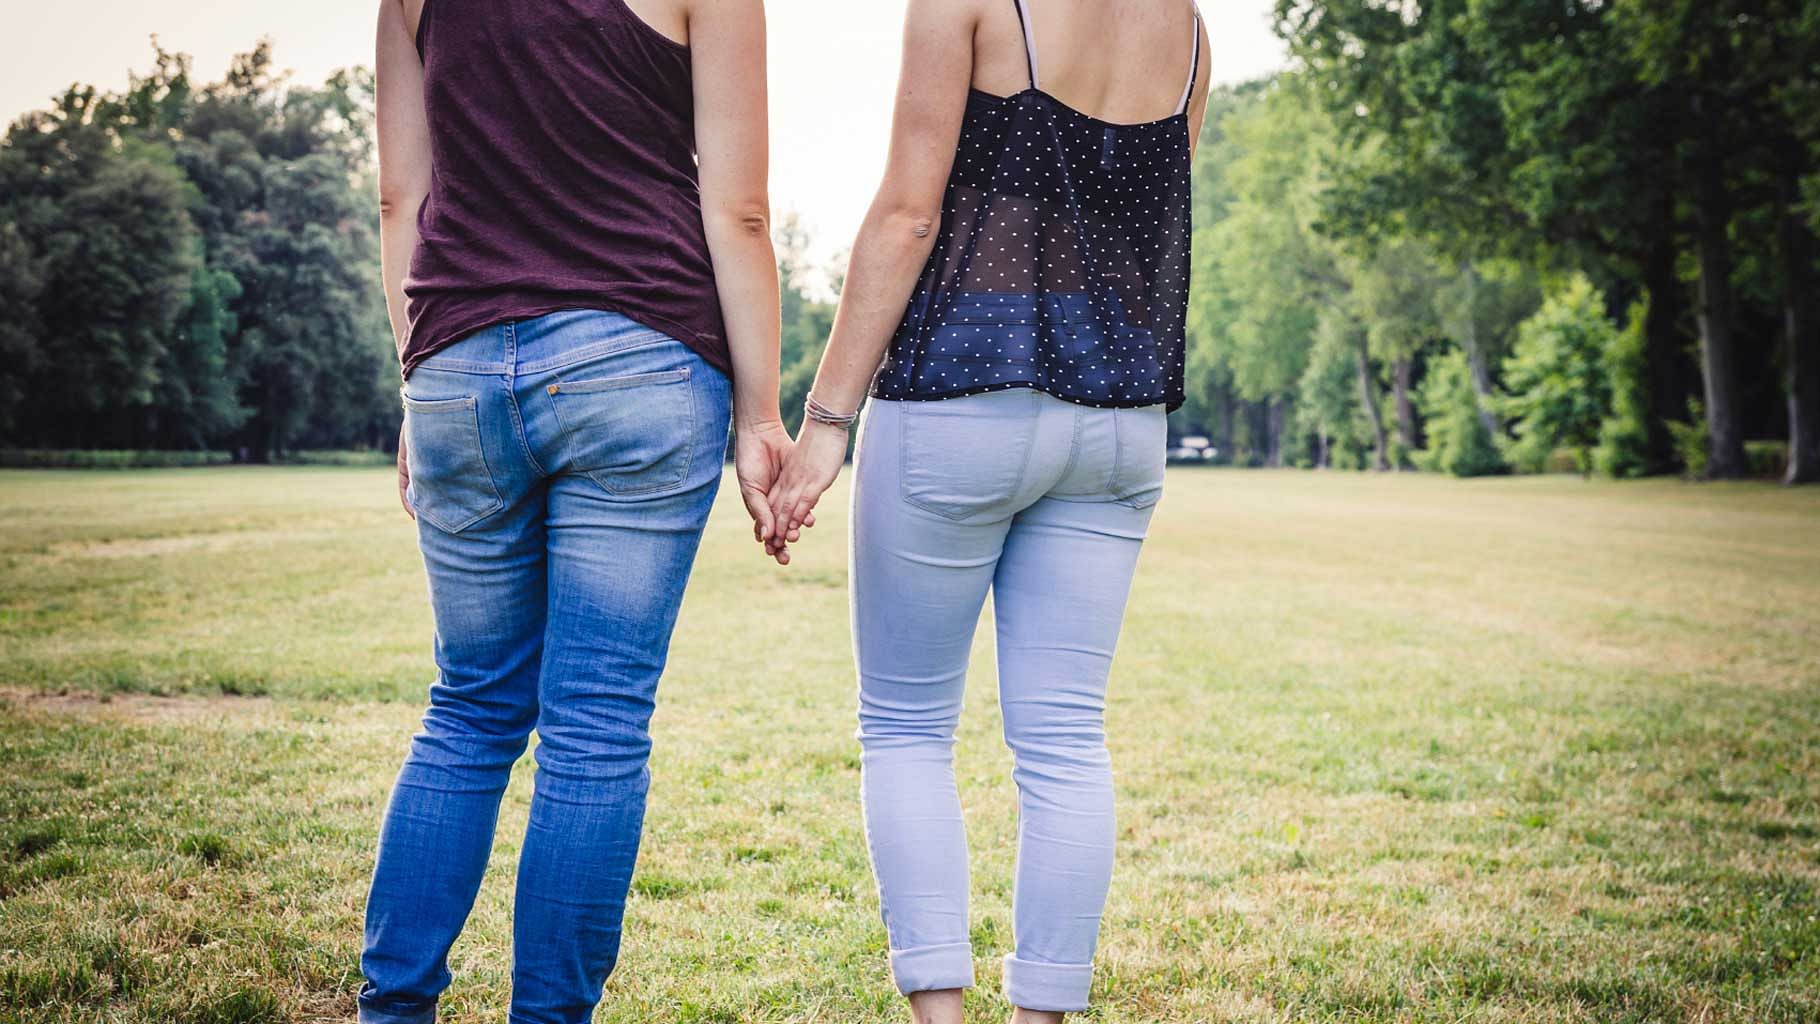 “I can’t help myself from noticing a girl”, writes in a female reader (Photo: iStock)